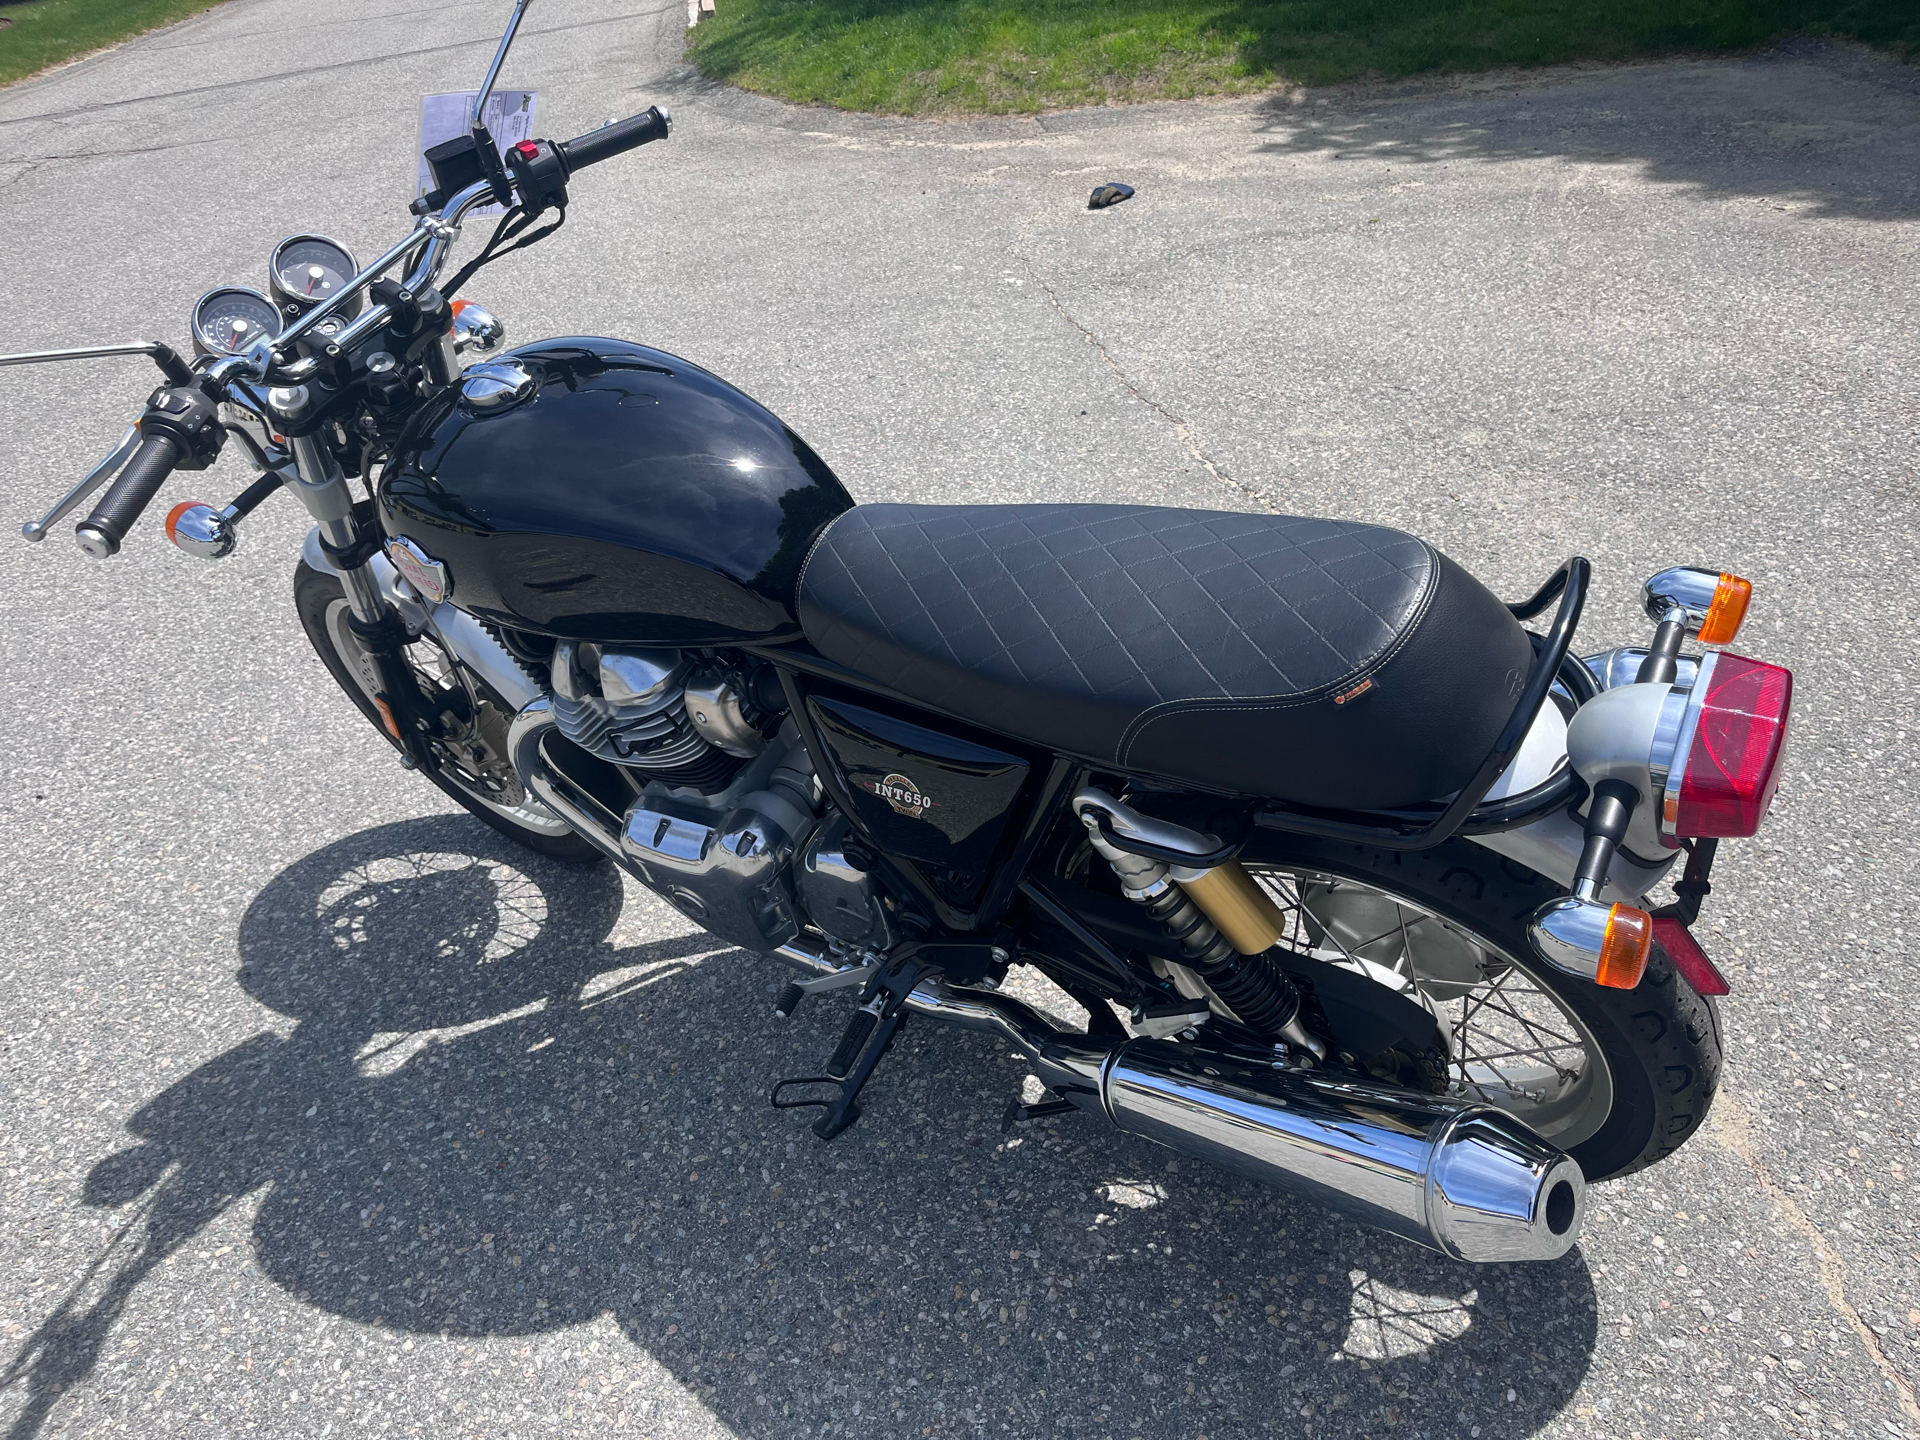 2020 Royal Enfield INT650 in Plymouth, Massachusetts - Photo 3